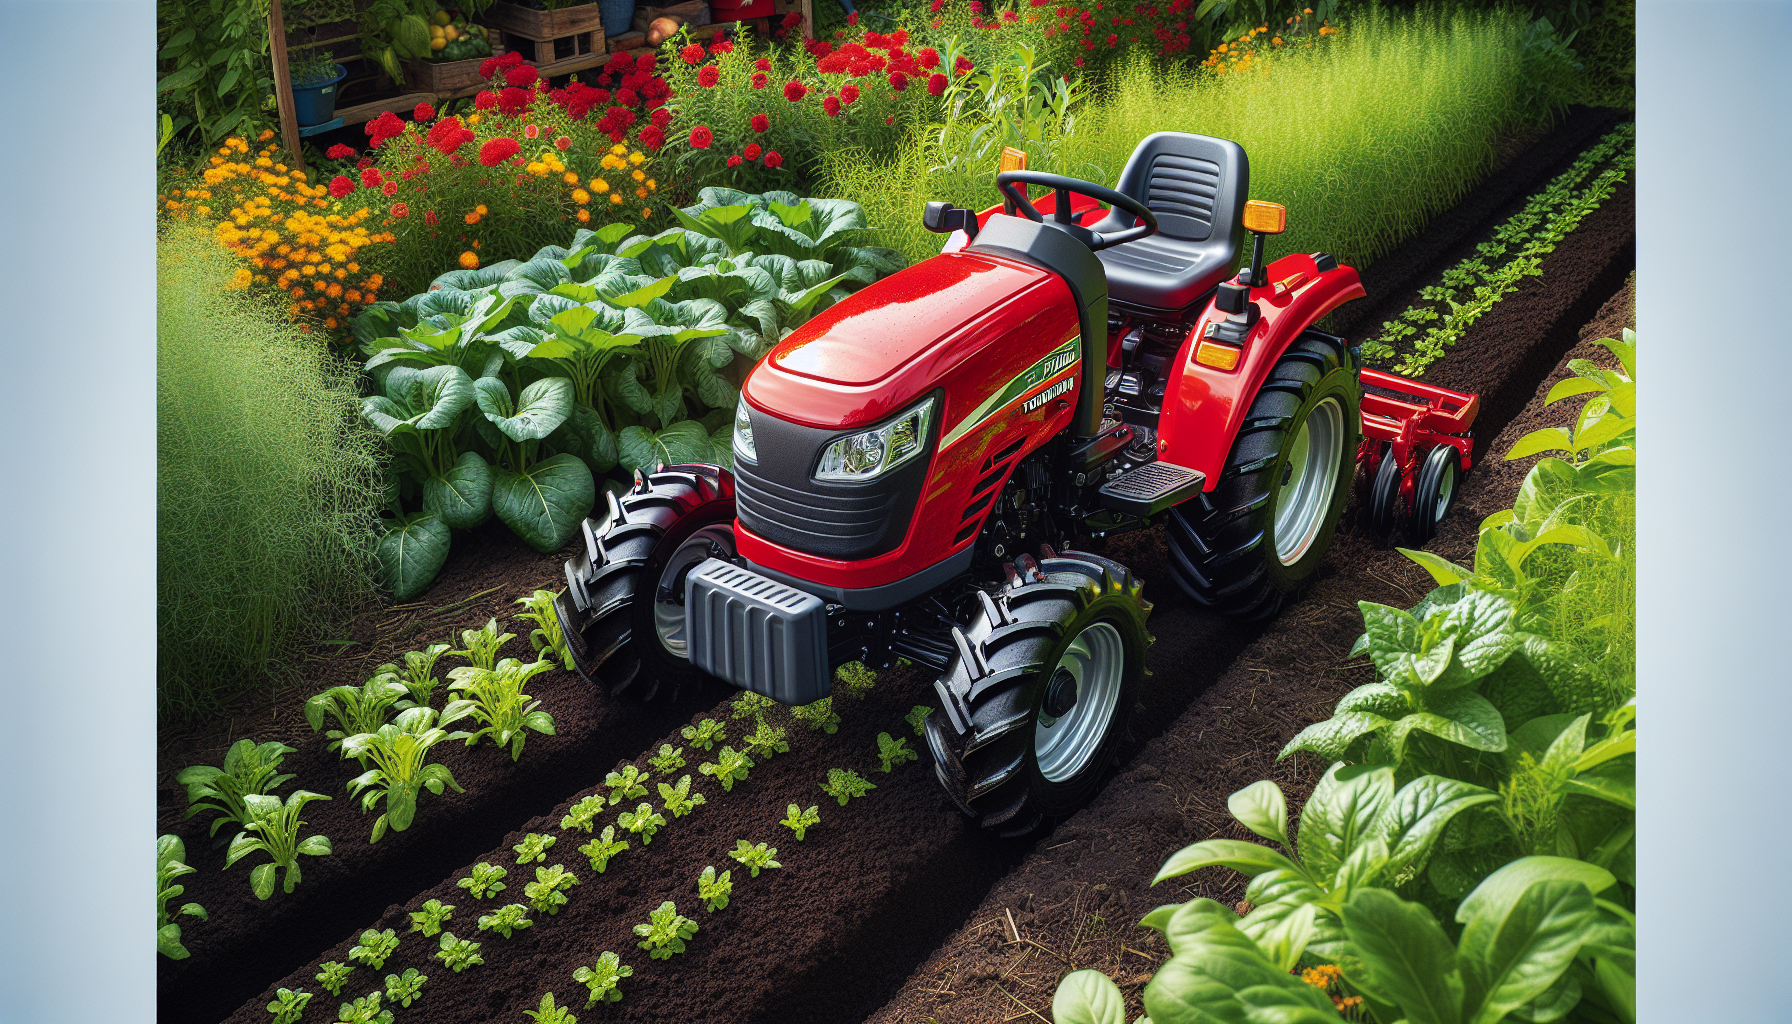 A sub-compact tractor working in a small garden